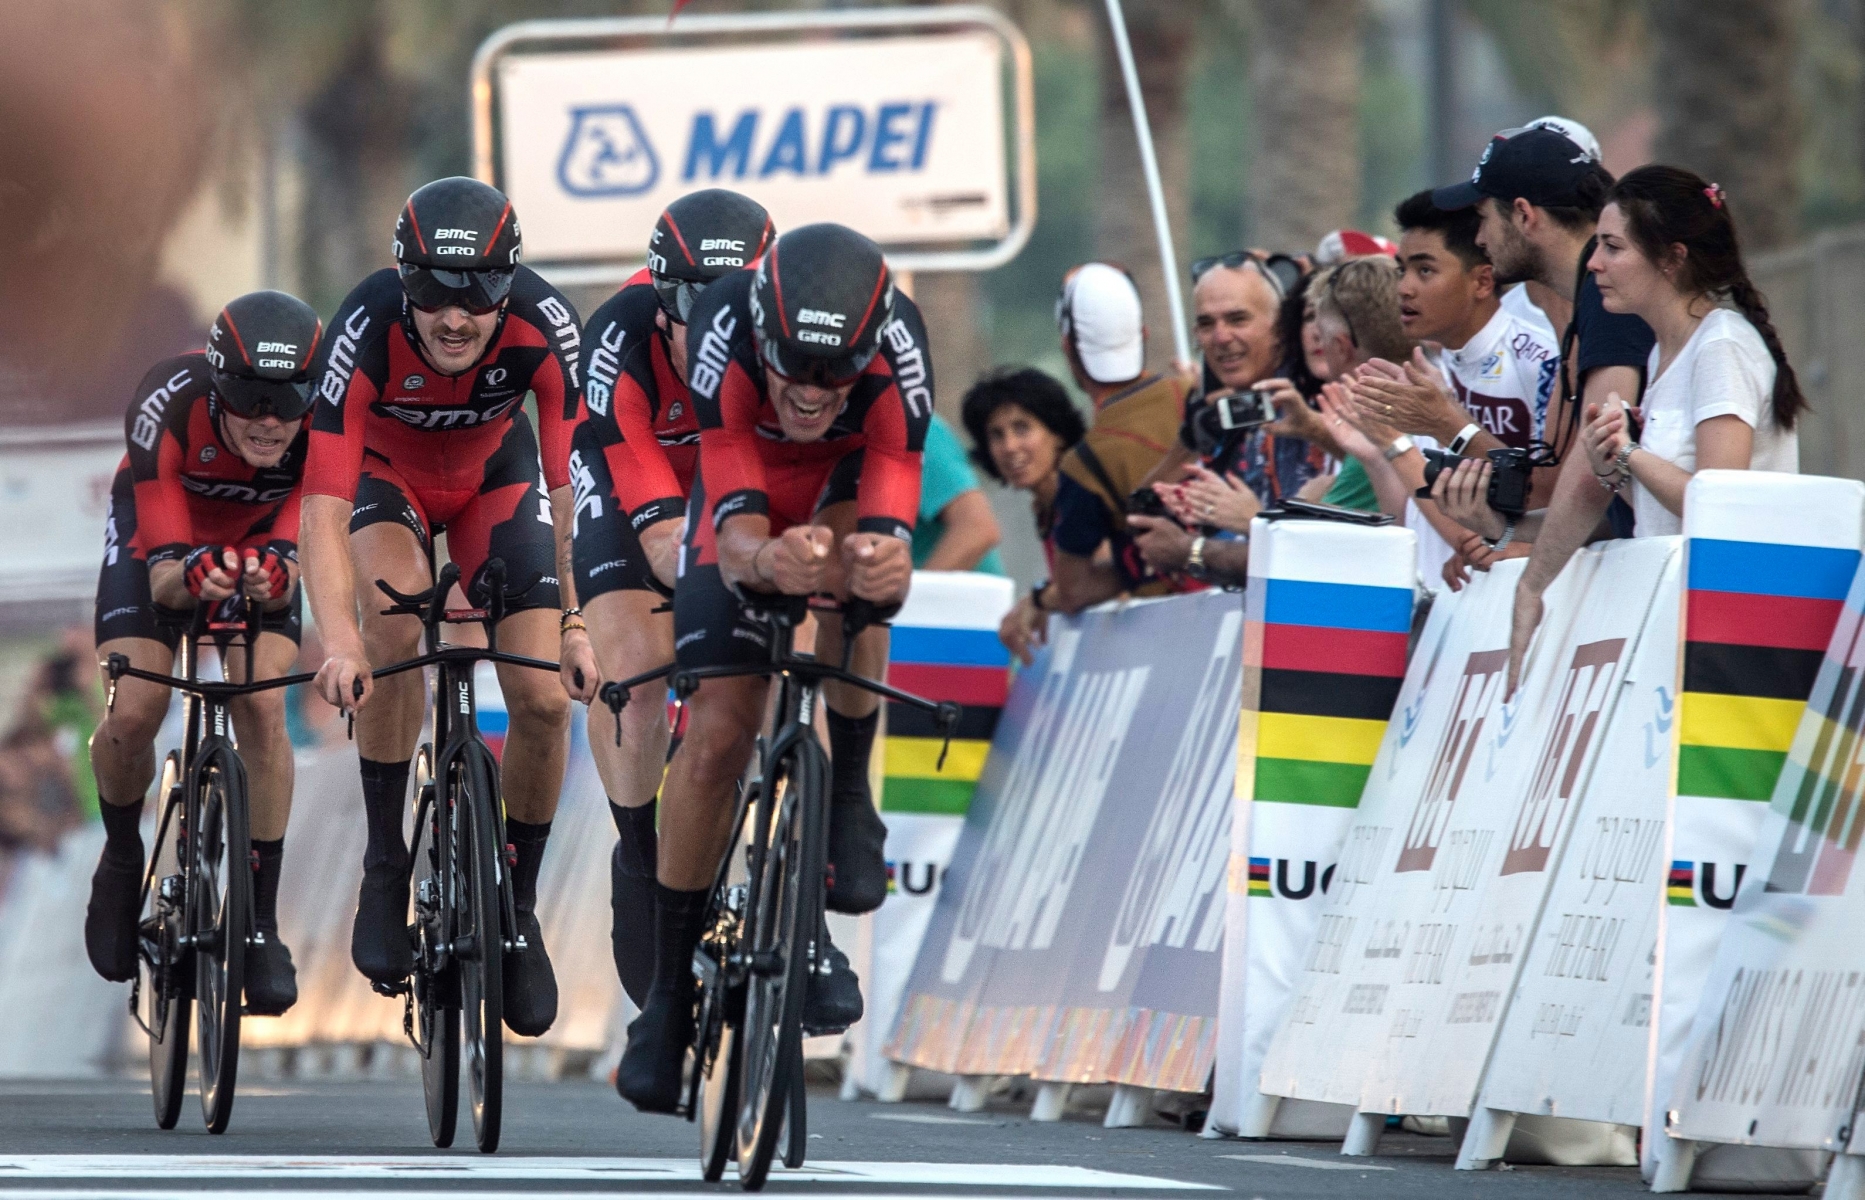 epa05578156 Cyclists of the US American BMC Racing Team team cross the finish line to finish second in the Men's Team Time Trial event during the 2016 cycling Road Wolrd Championships in Qatar, Doha, 09 October 2016.  EPA/OLIVER WEIKEN QATAR ROAD CYCLING WORLD CHAMPIONSHIPS 2016